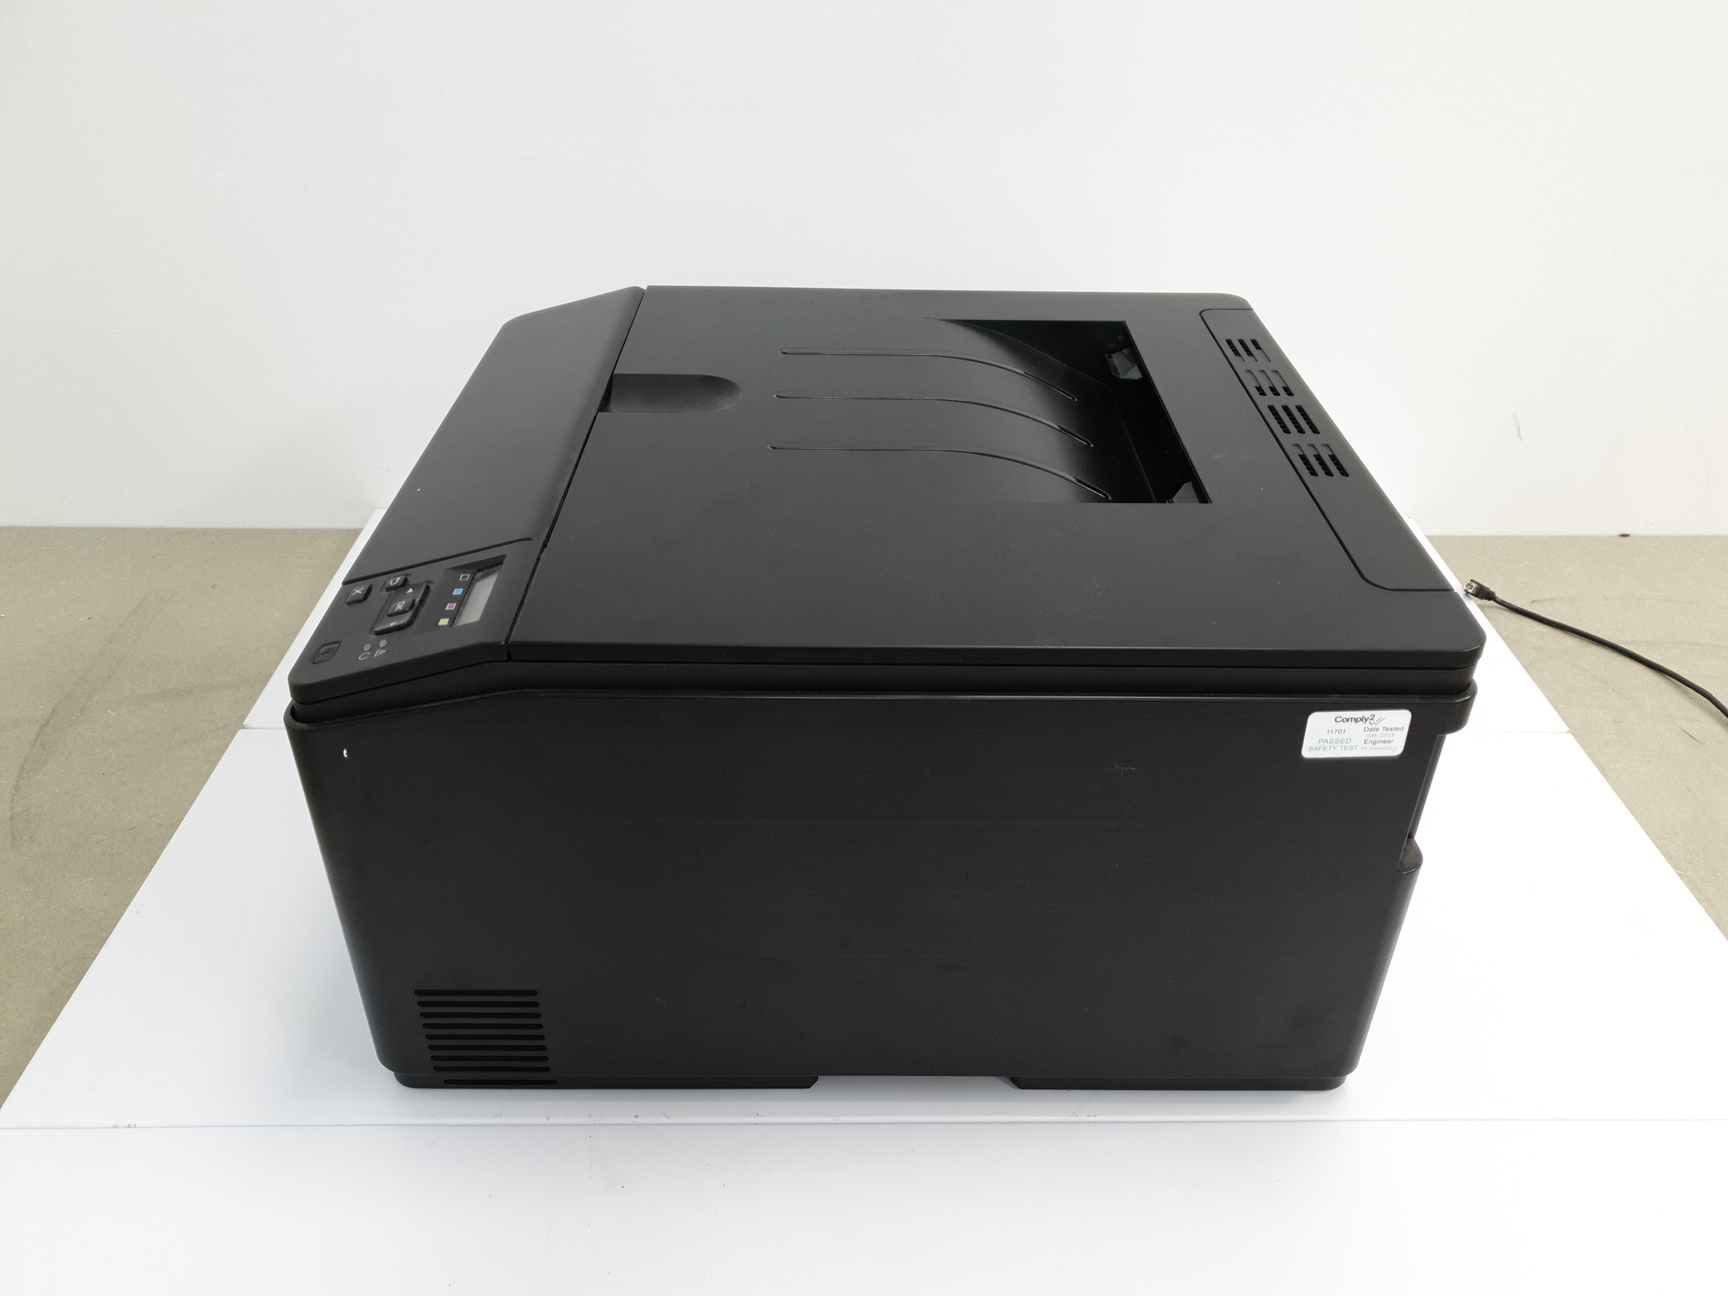 HP LaserJet Pro 200 M251nw Up to 14 ppm 600 x 600 dpi Wireless Workgroup Color Laser Printer ...